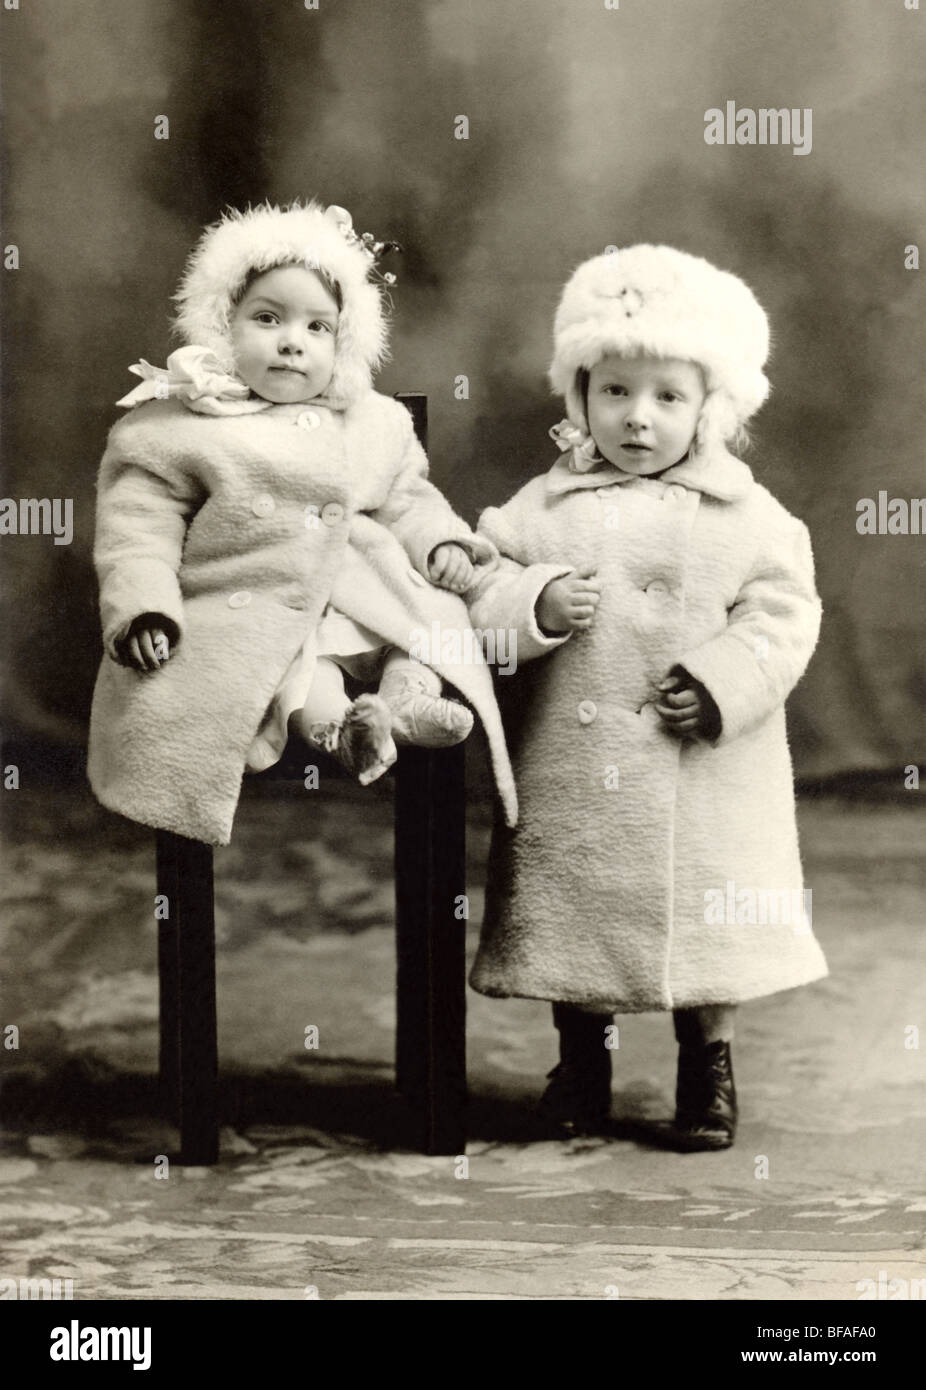 Two Little Girls in Winter Outfits Stock Photo